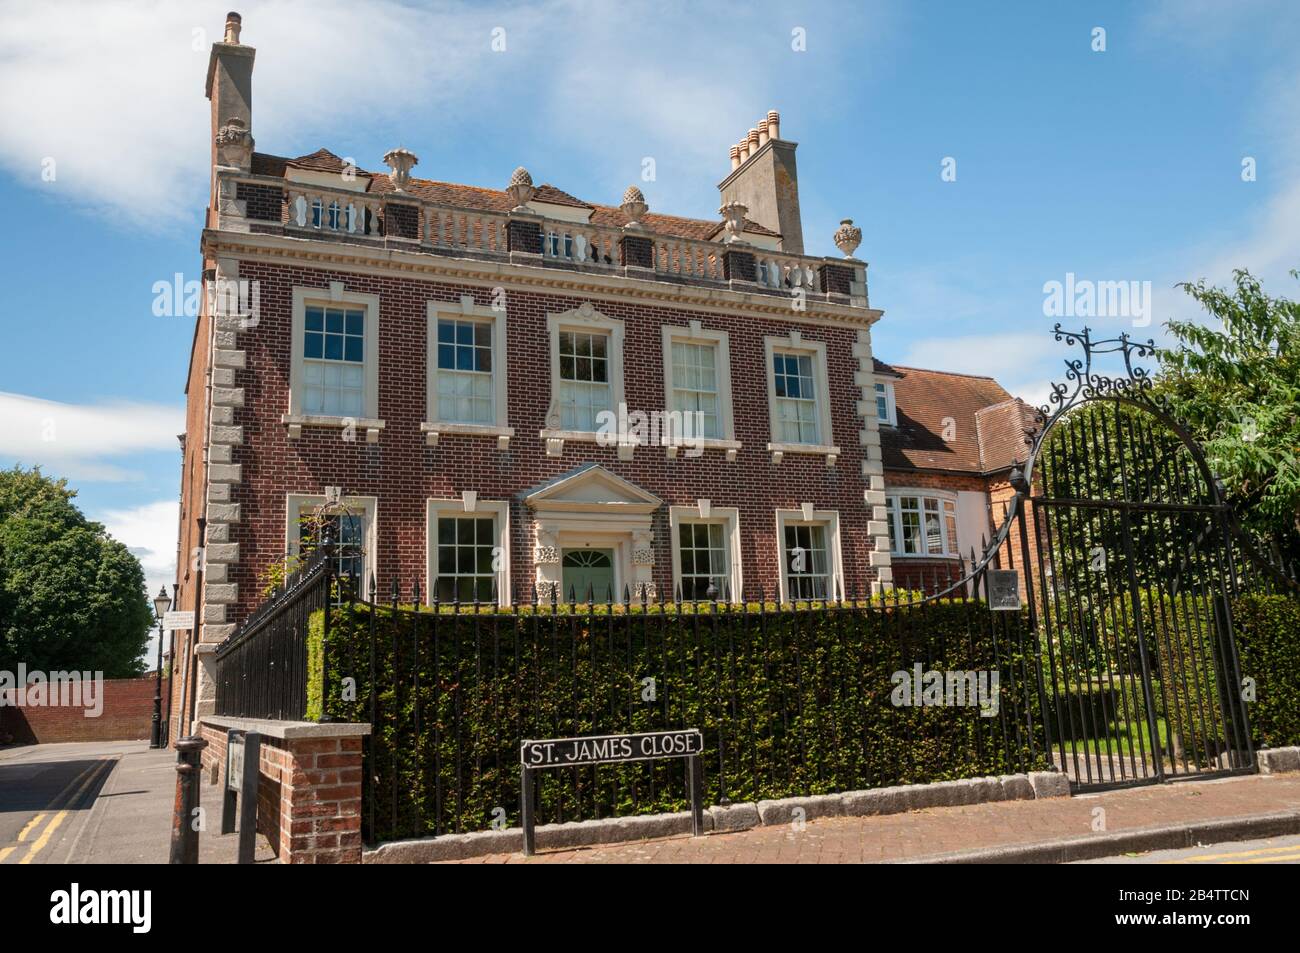 West End House in the old town of Poole, Dorset in England, was built for merchant John Slade and is now a private holiday rental property. Stock Photo